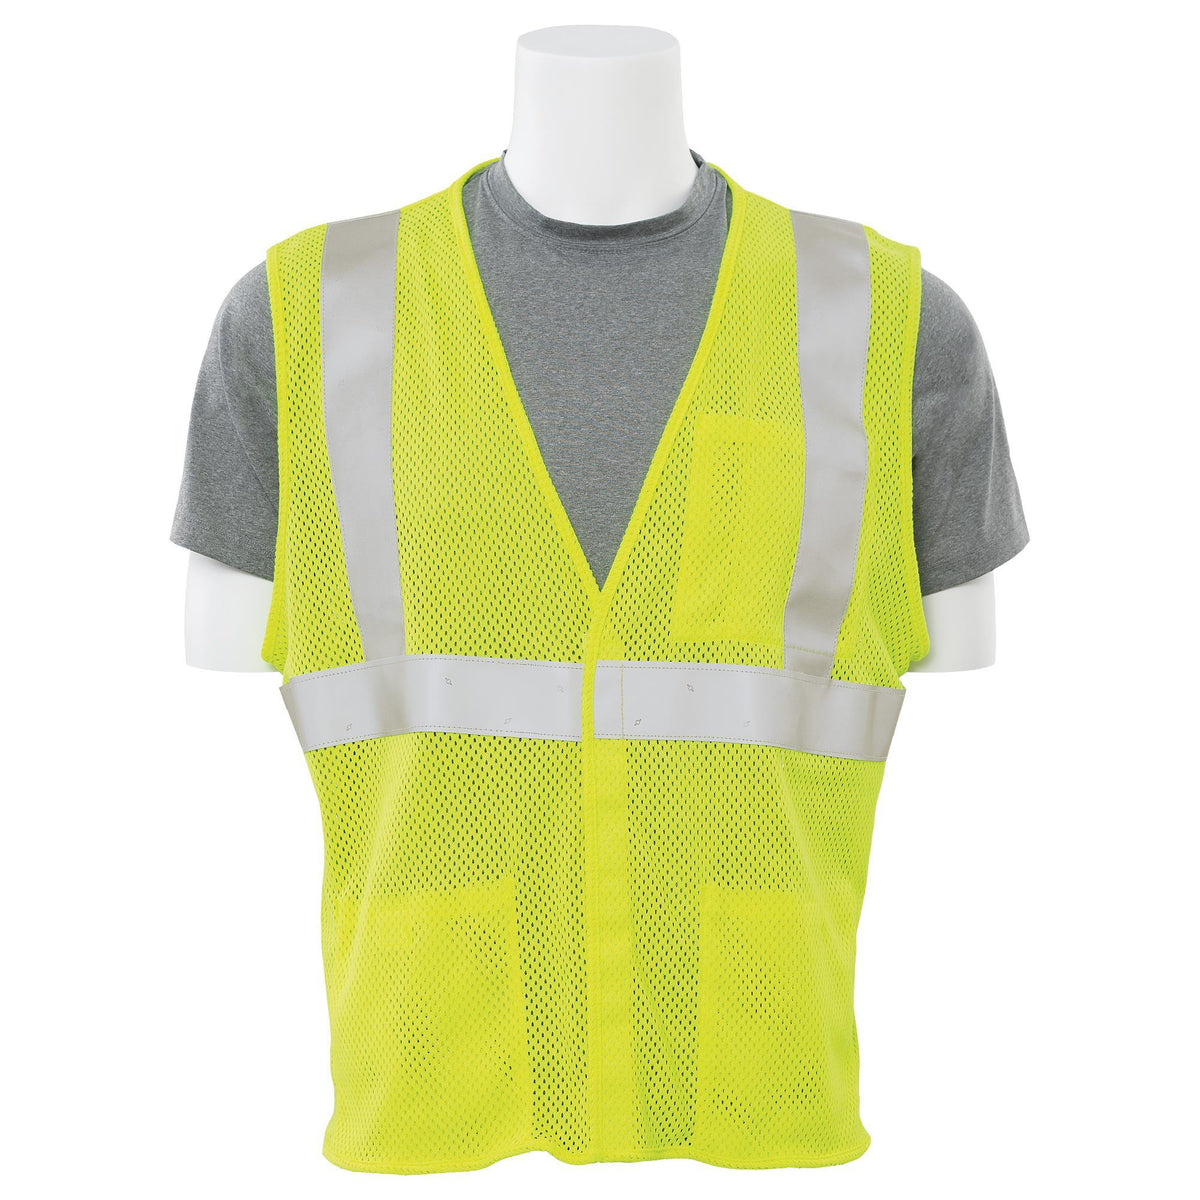 IFR152 Class 2 Inherently Flame Resistant Mesh Safety Vest 1PC